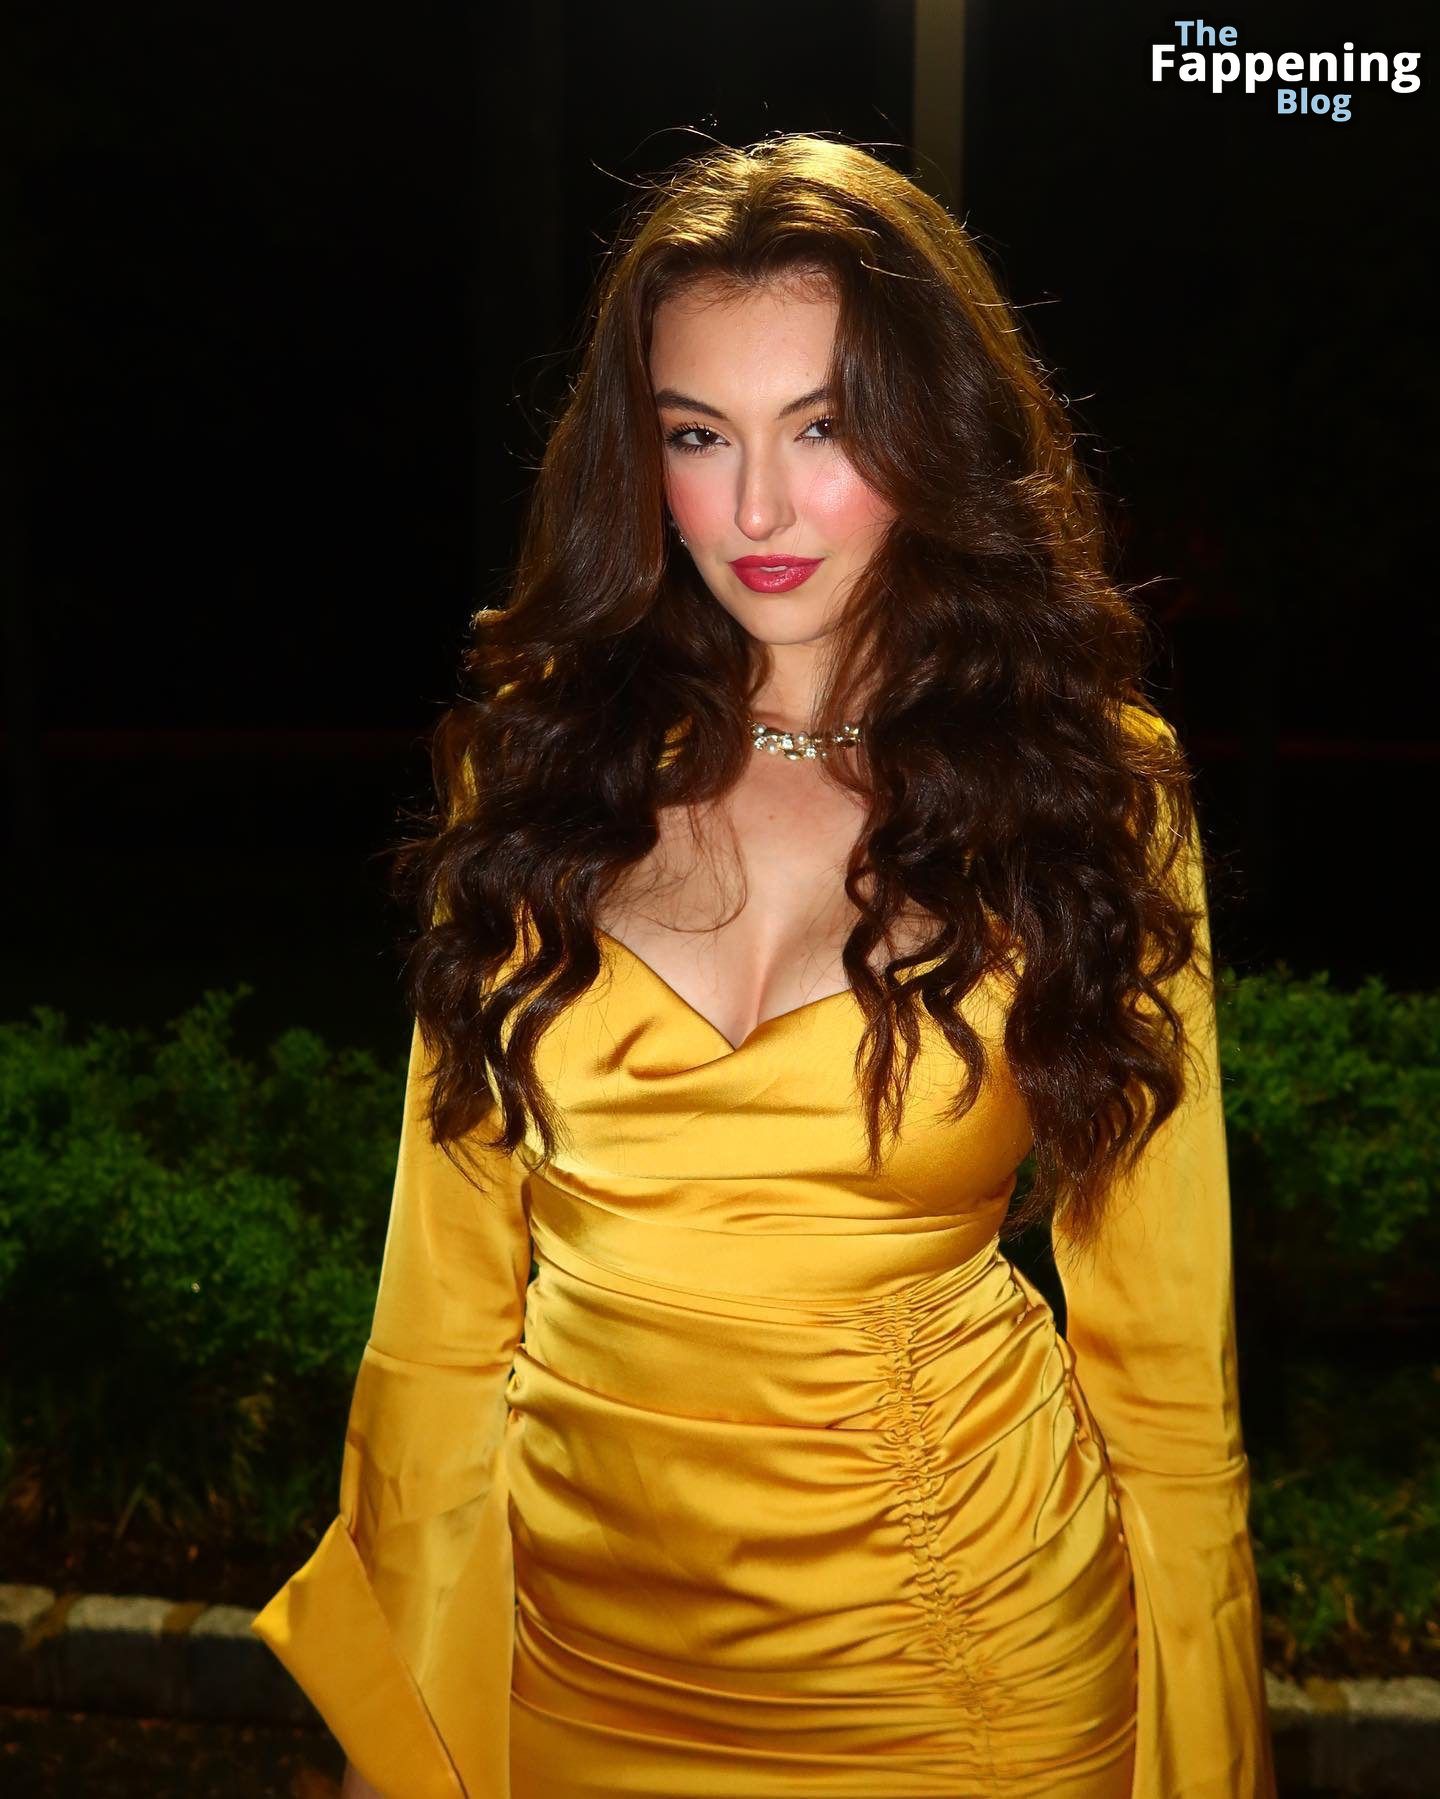 Rachel Pizzolato Displays Her Sexy Figure in a Yellow Dress (7 Photos)